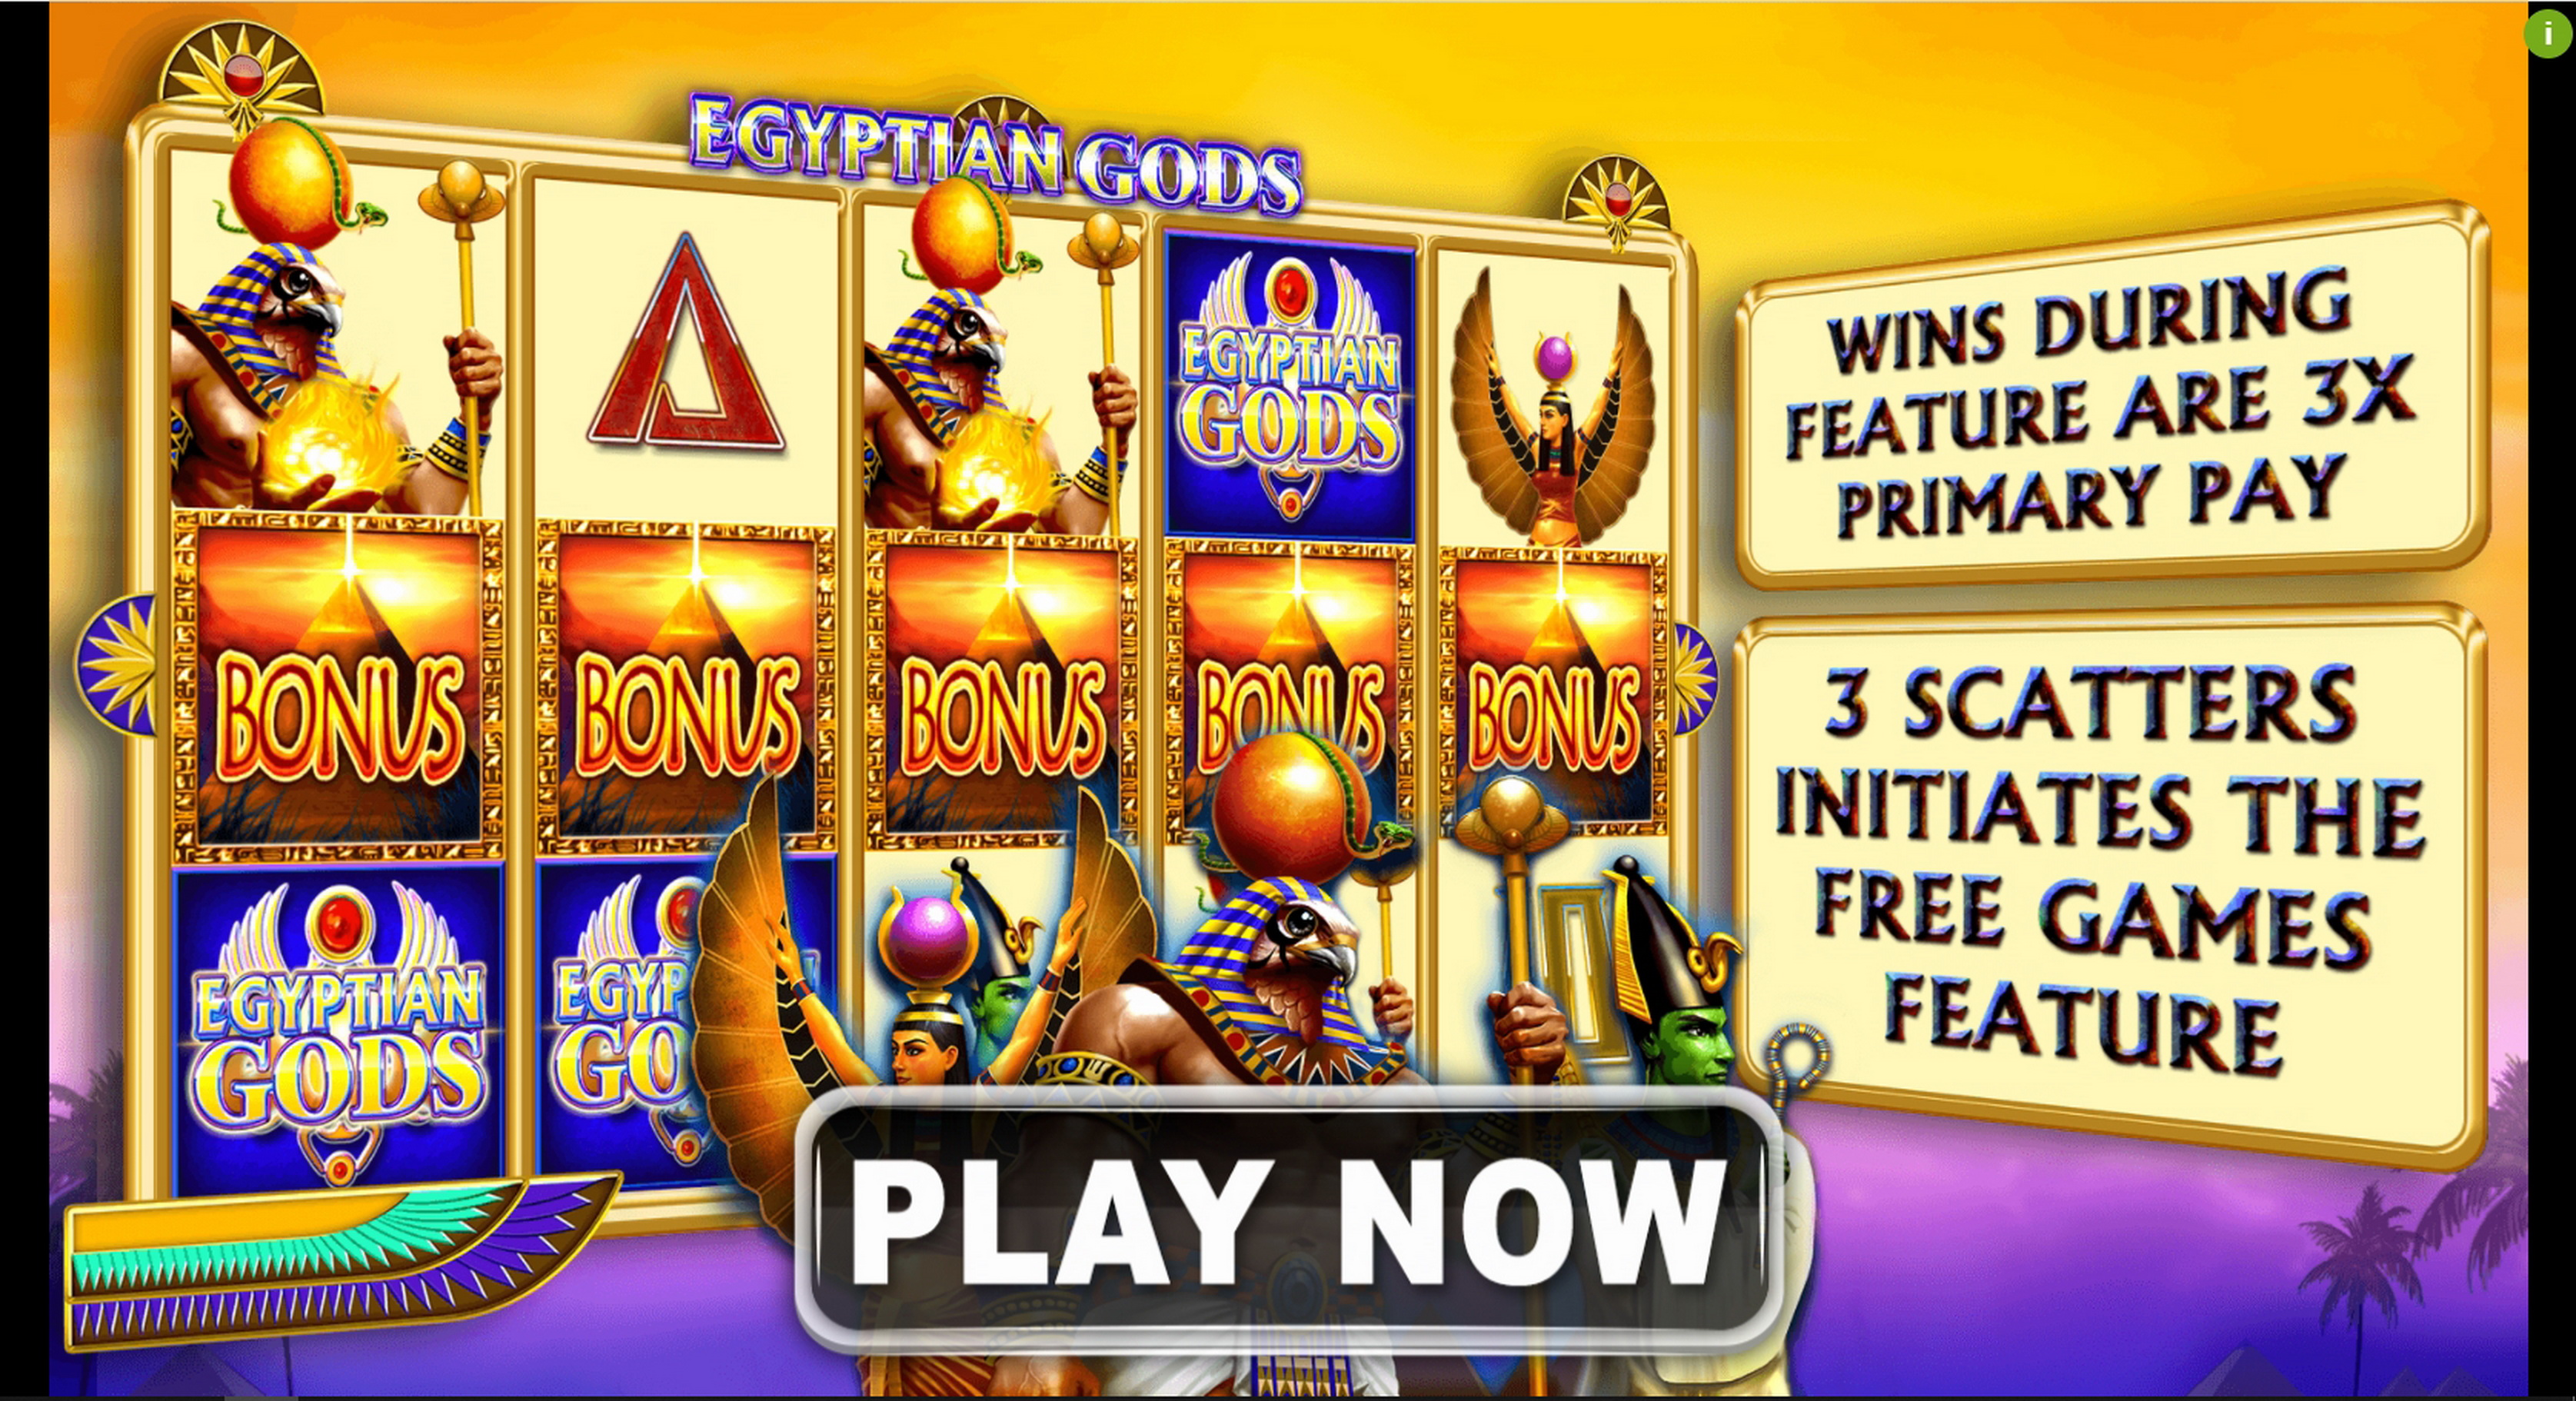 Play Egyptian Gods Free Casino Slot Game by Spin Games